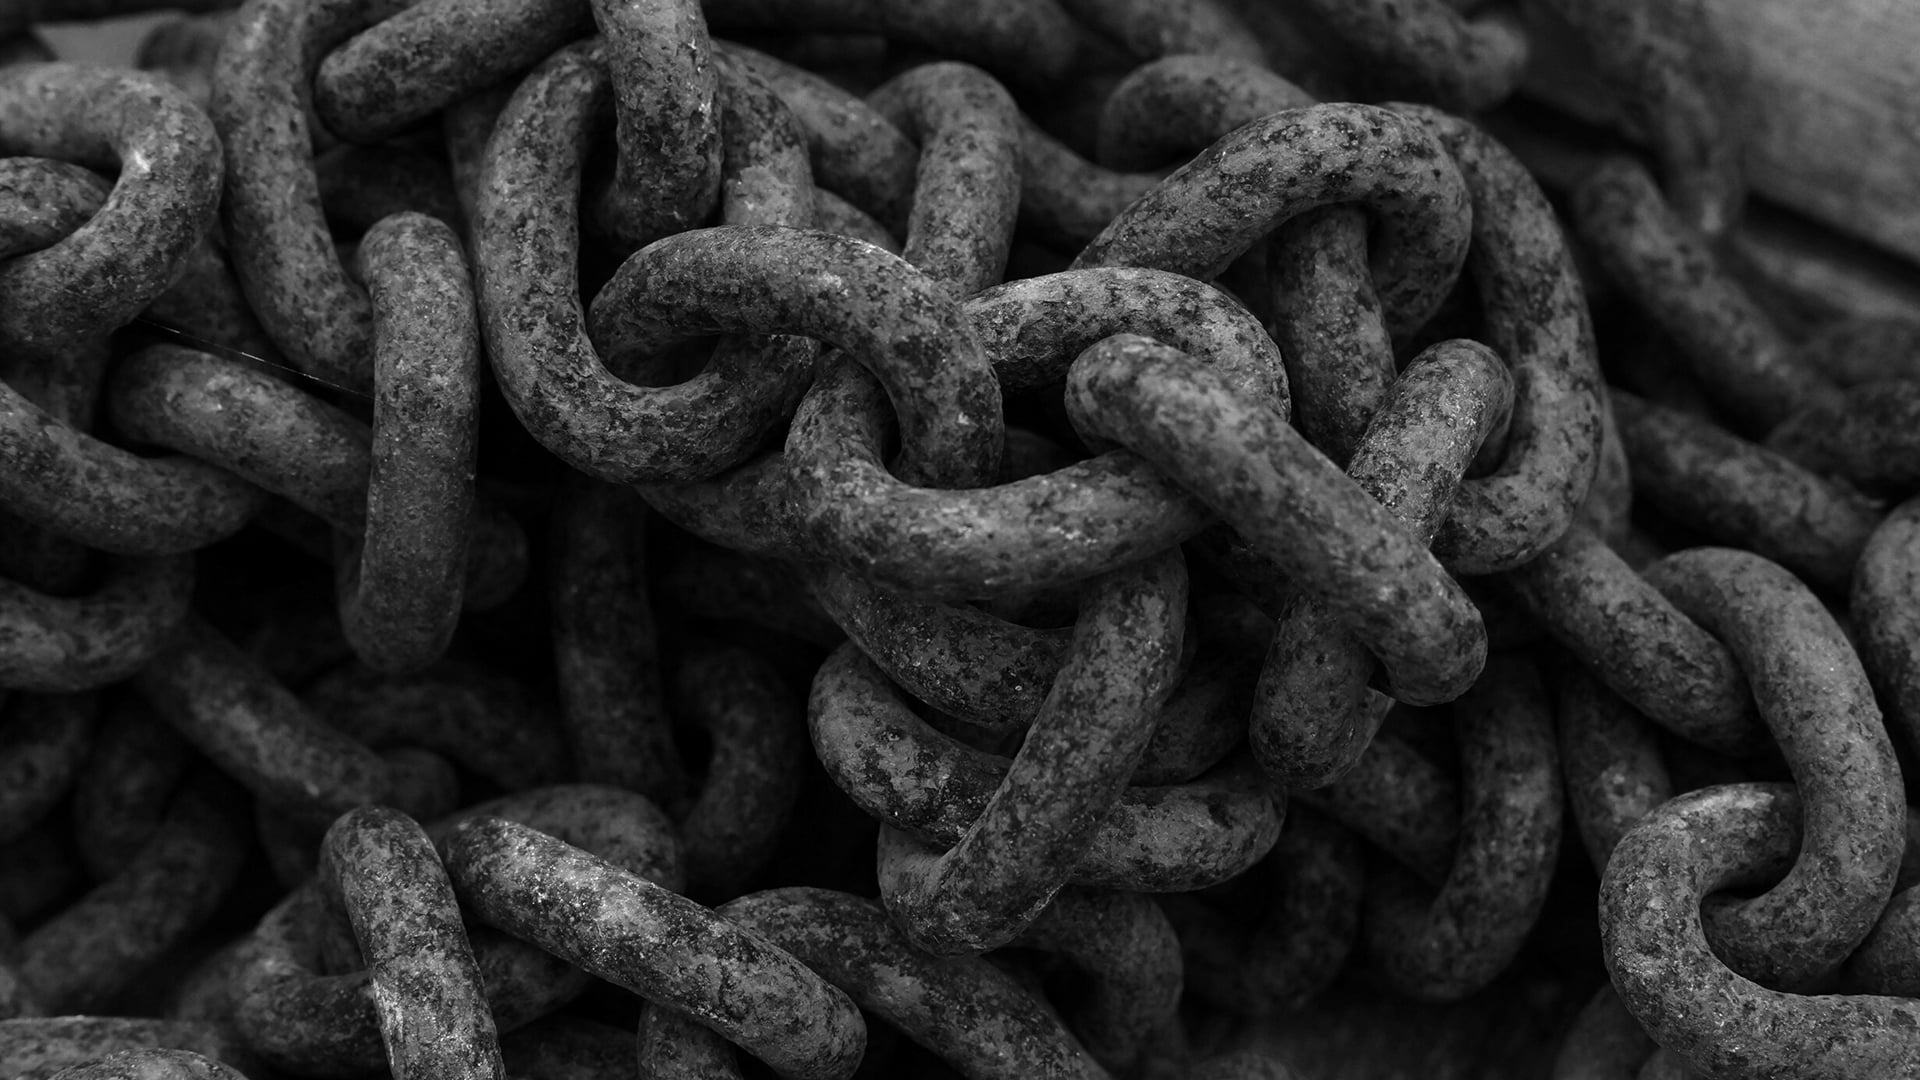 gray link chain, monochrome, chains, metal, old, strength, backgrounds